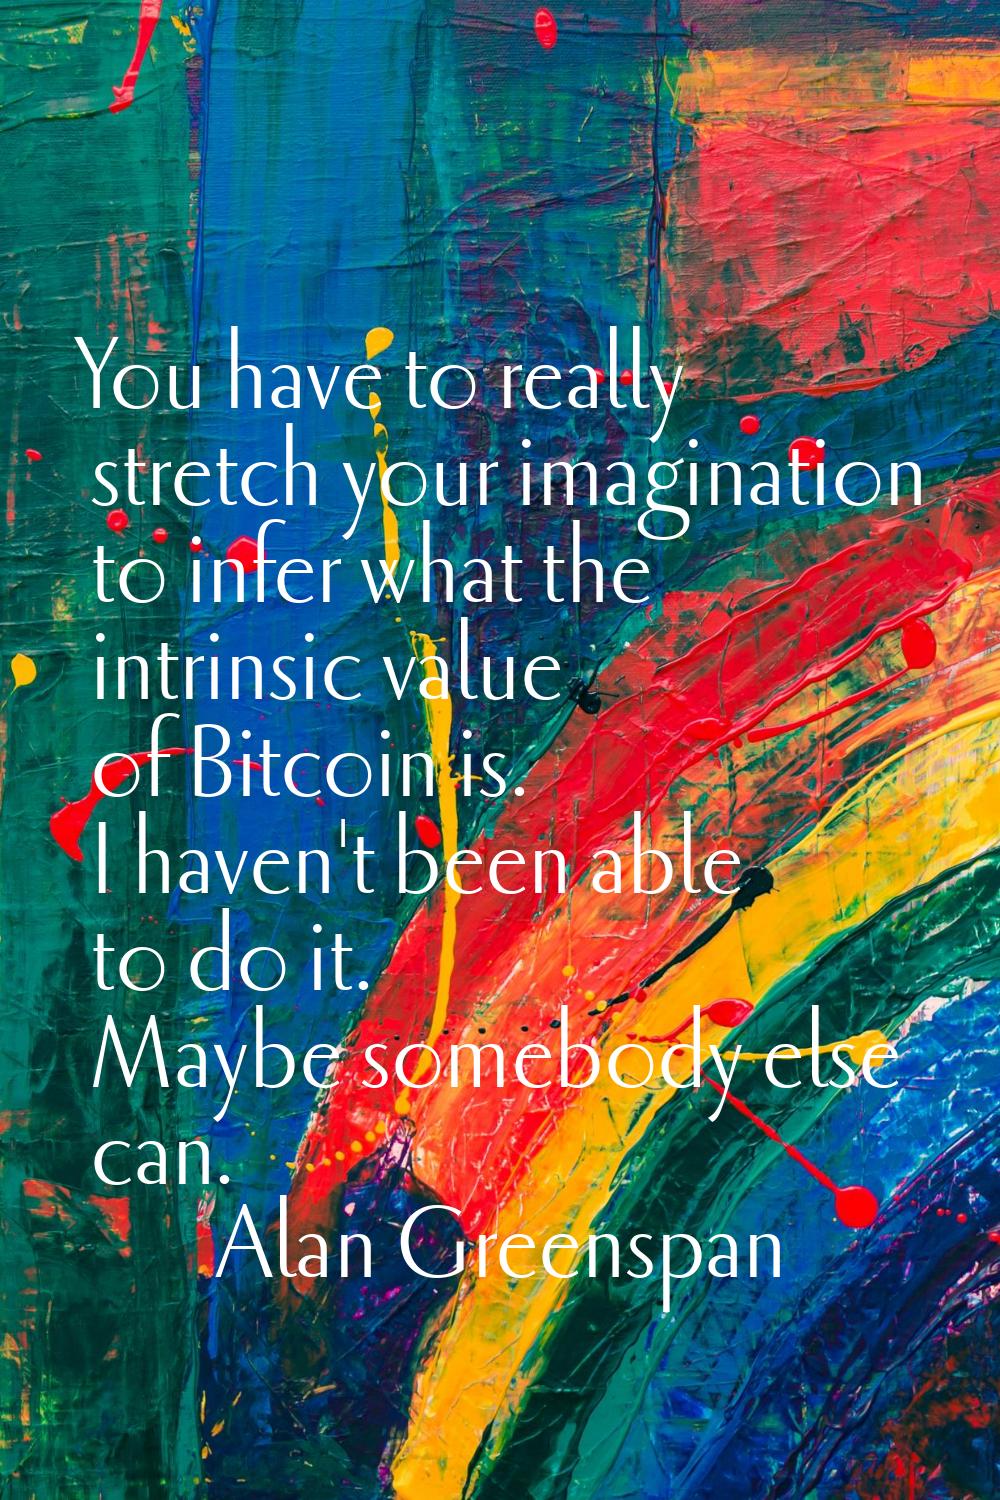 You have to really stretch your imagination to infer what the intrinsic value of Bitcoin is. I have